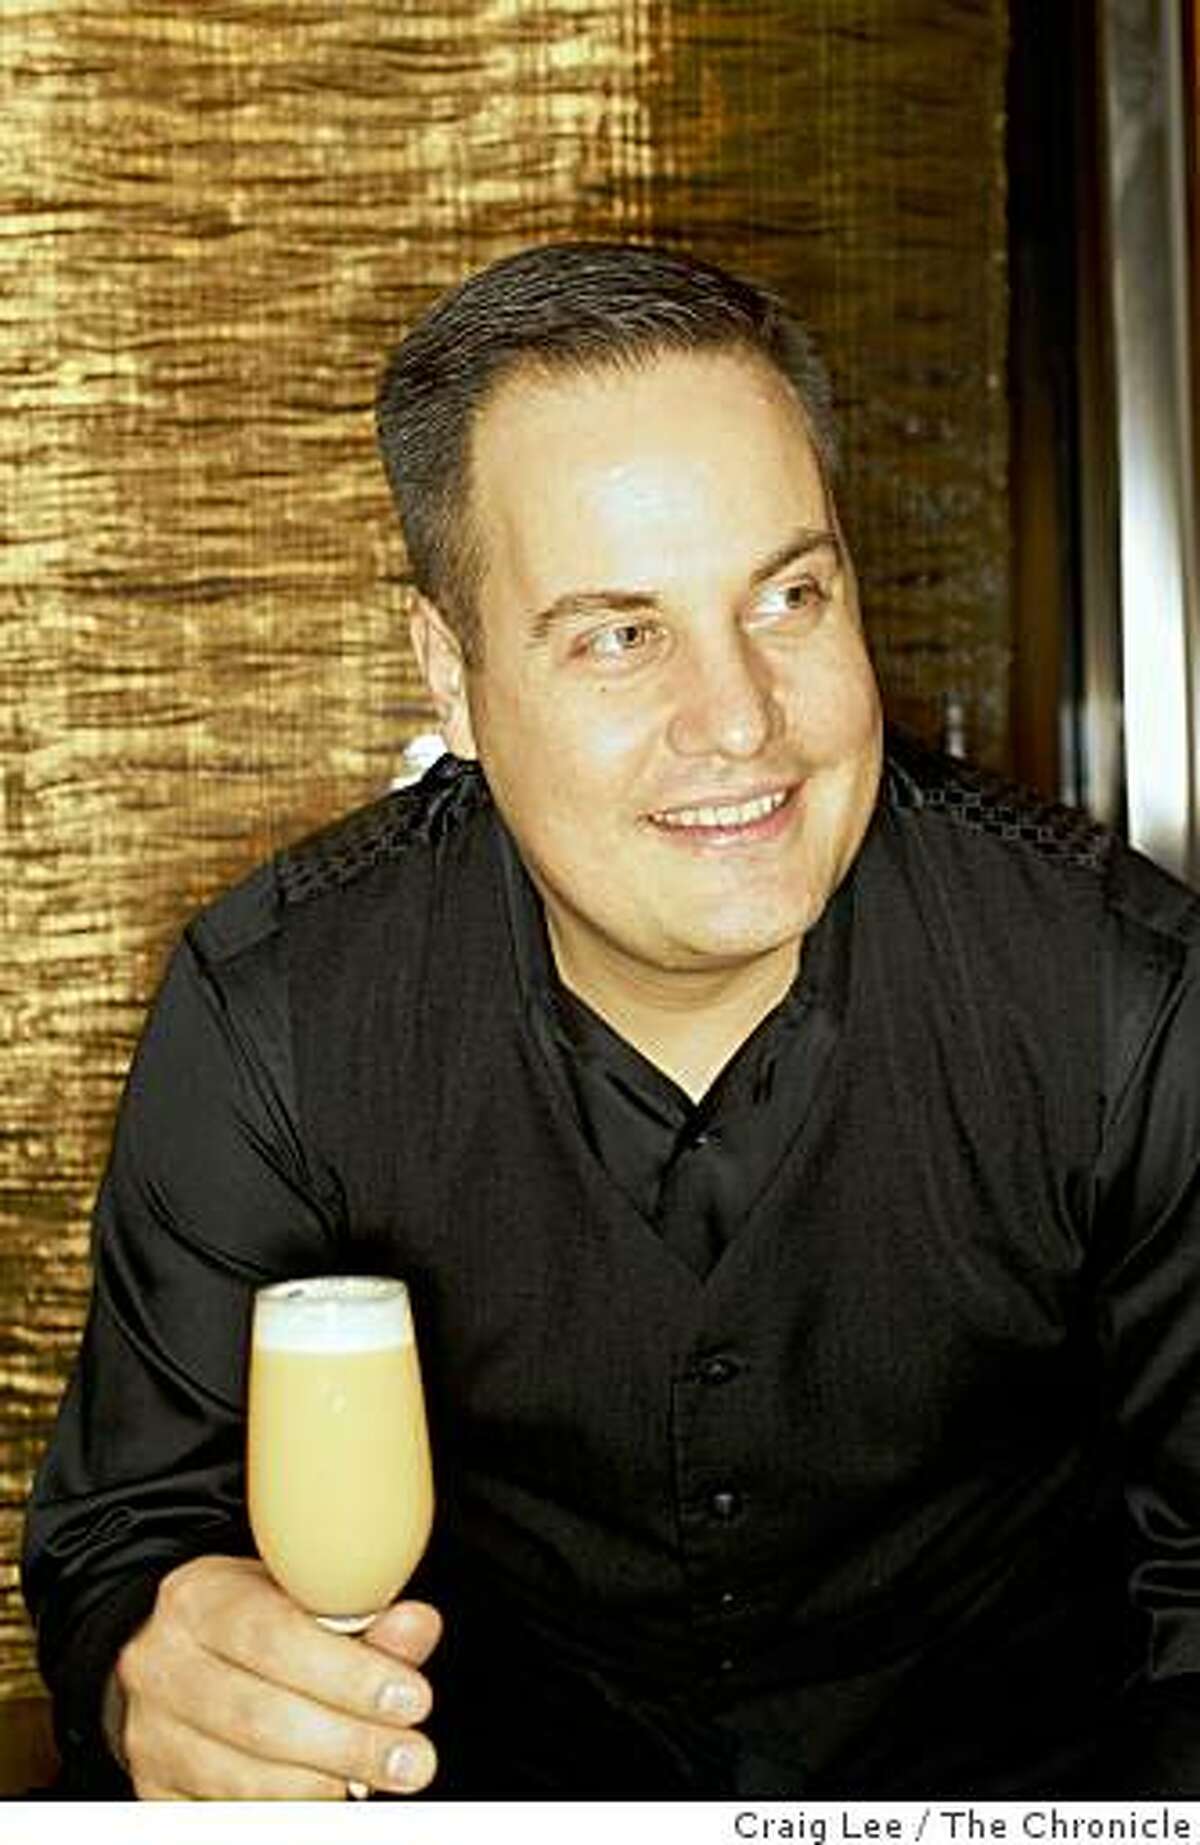 Marco Dionysos, bar manager at Clock Bar with his drink he created called English Breakfast in San Francisco, Calif., on February 18, 2009. Behind him is a curtain made of gold.